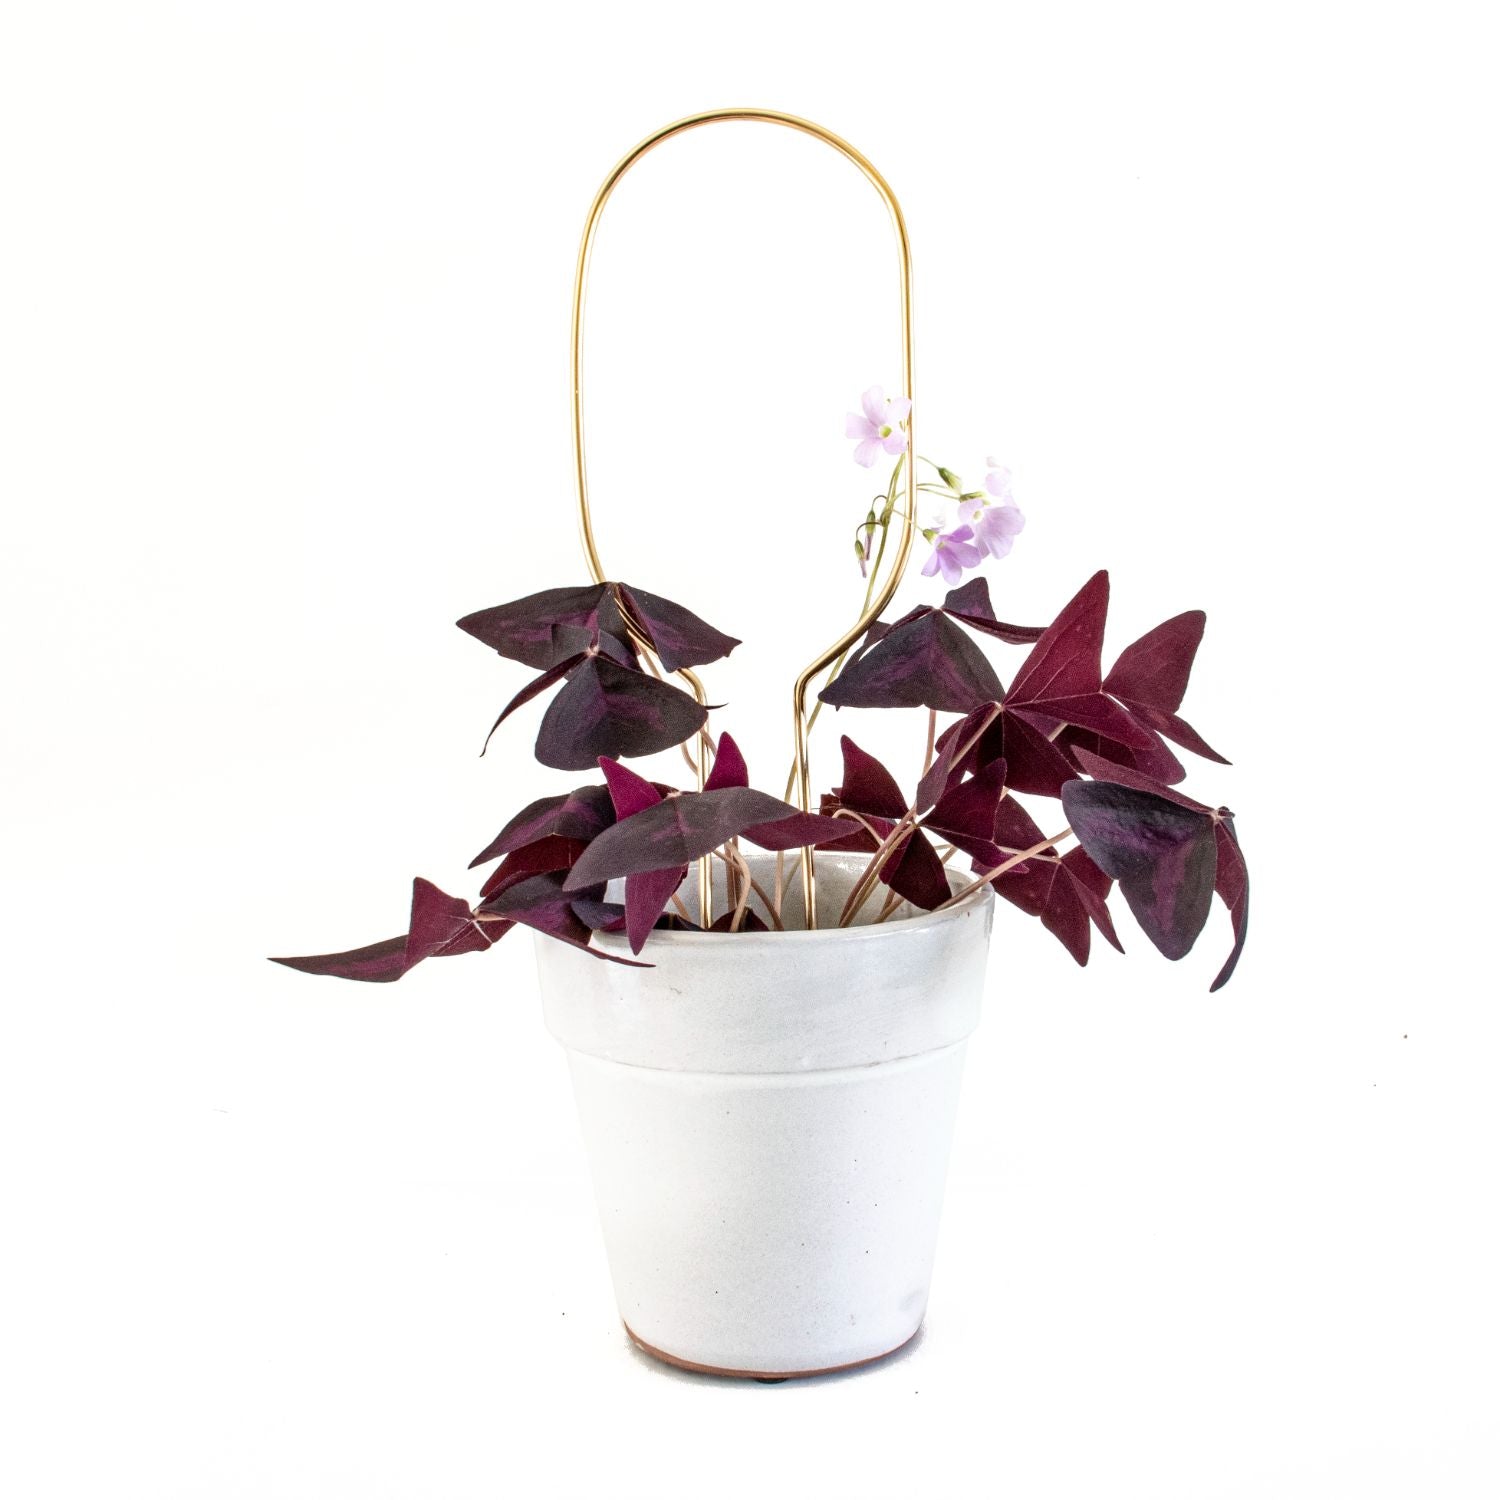 Botanopia 'Hoop' Plant Stake, Gold with Plant in Pot